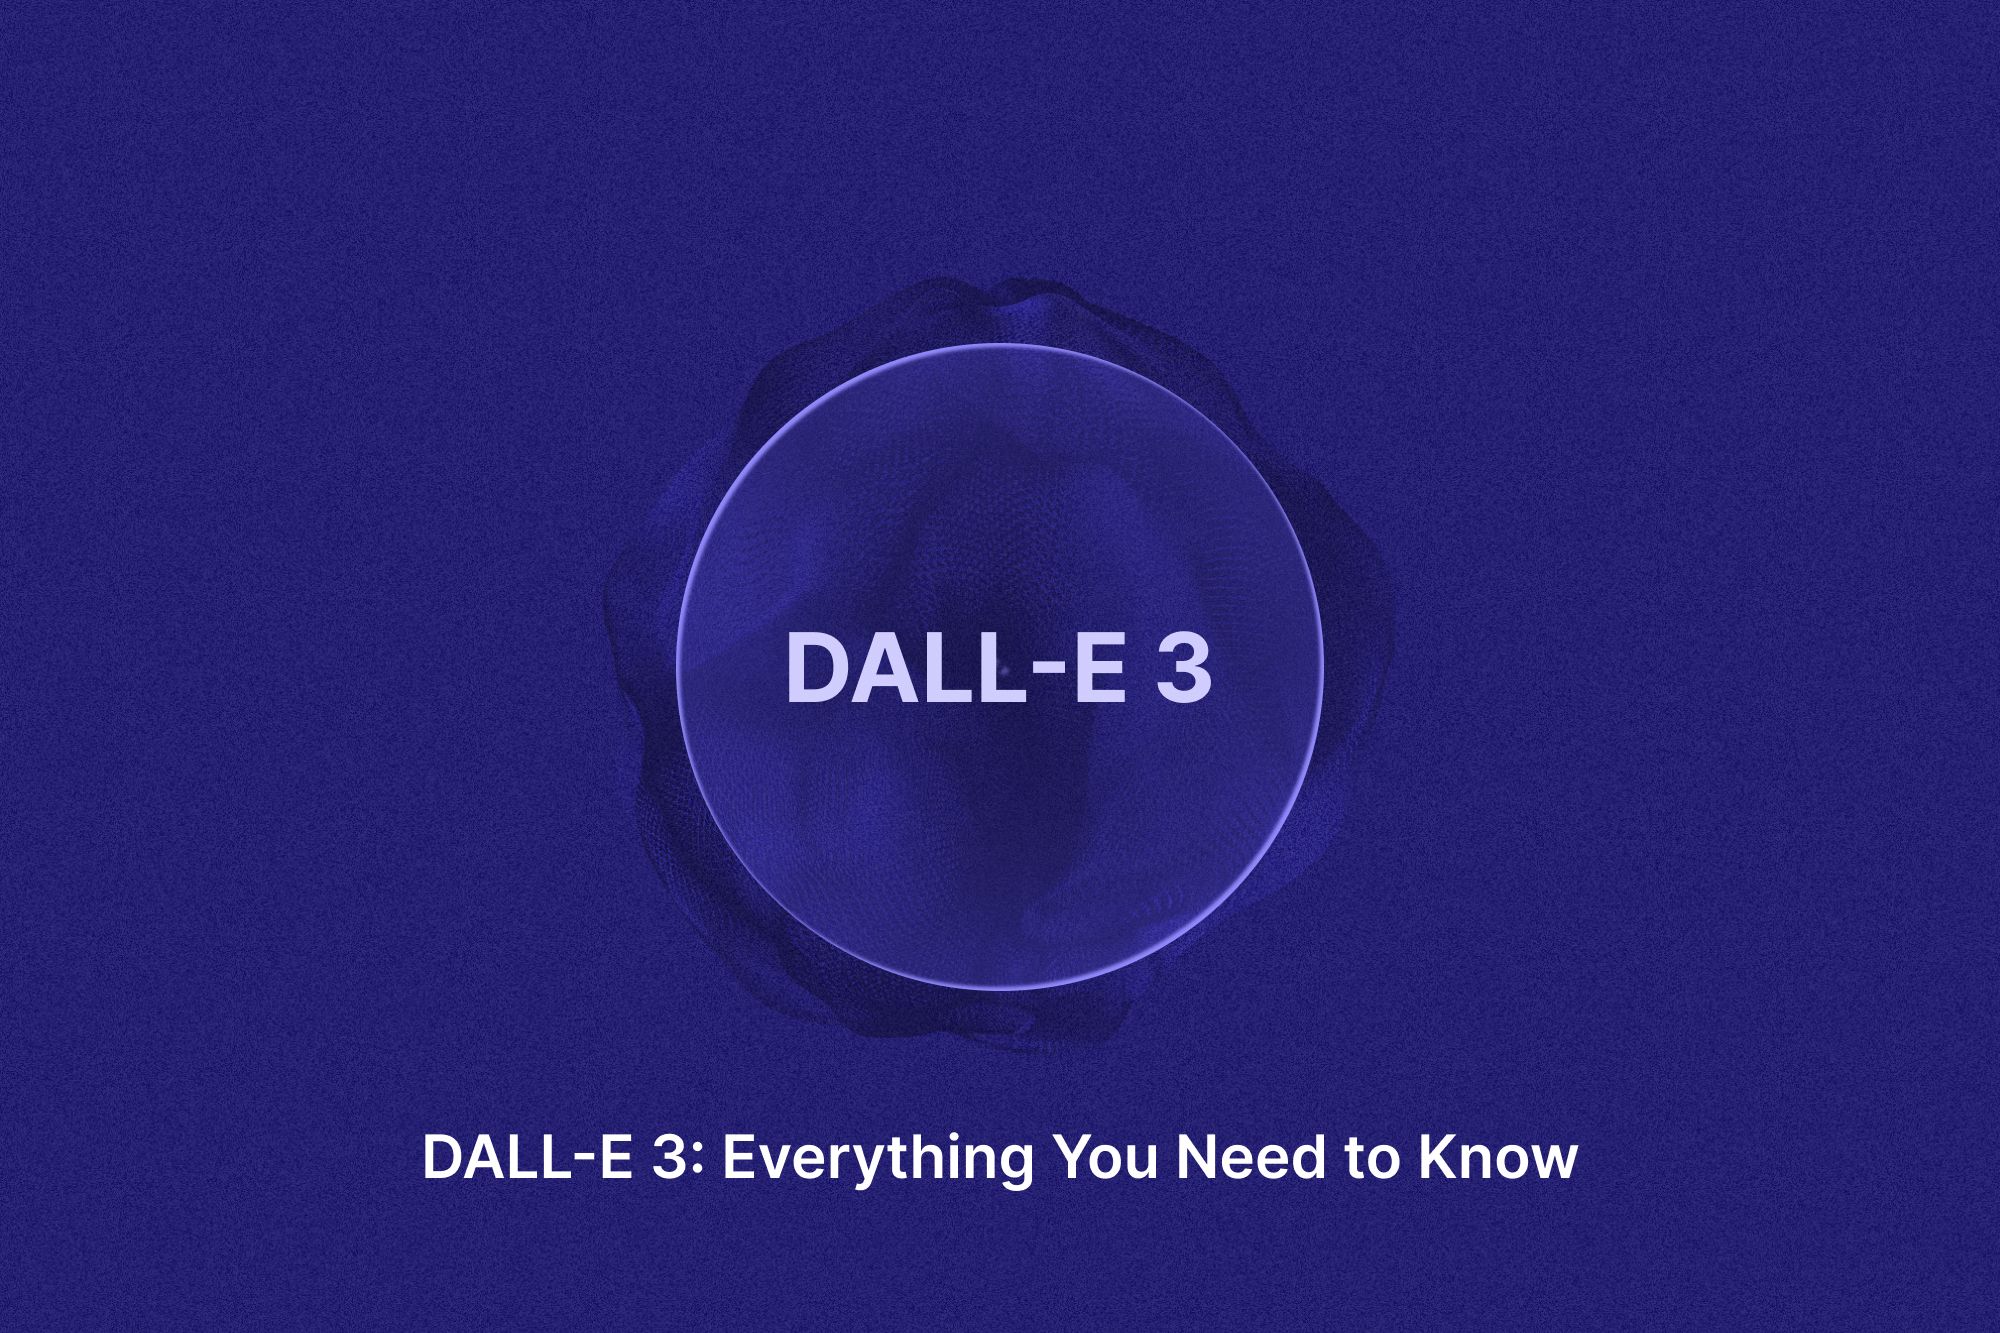 DALL-E 3: Everything You Need to Know